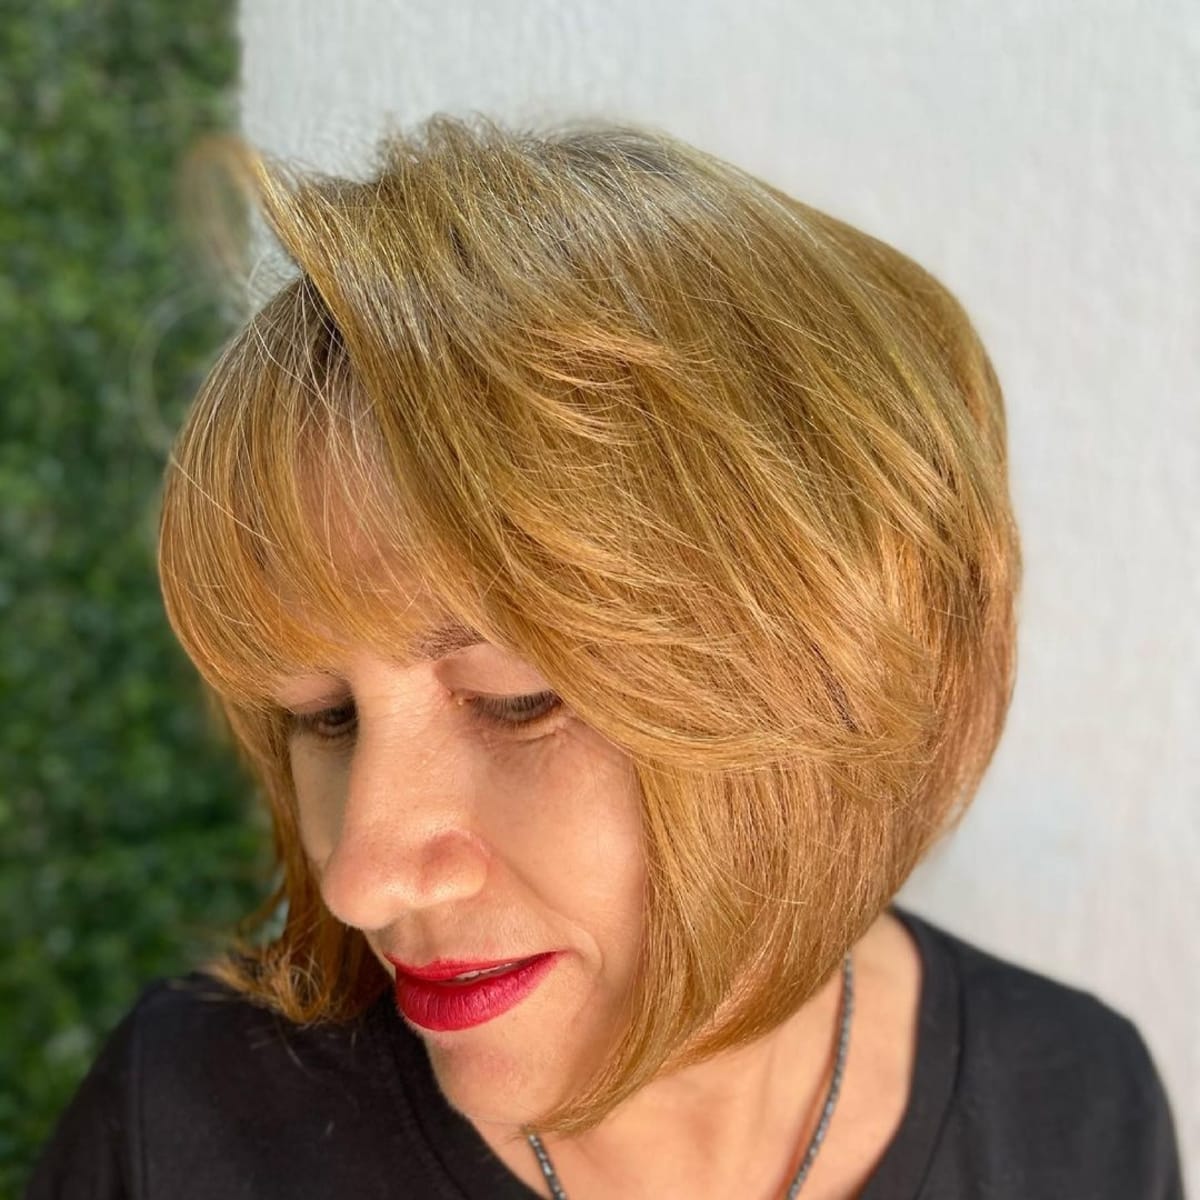 Tapered rounded bob with feathered layers for women over 60